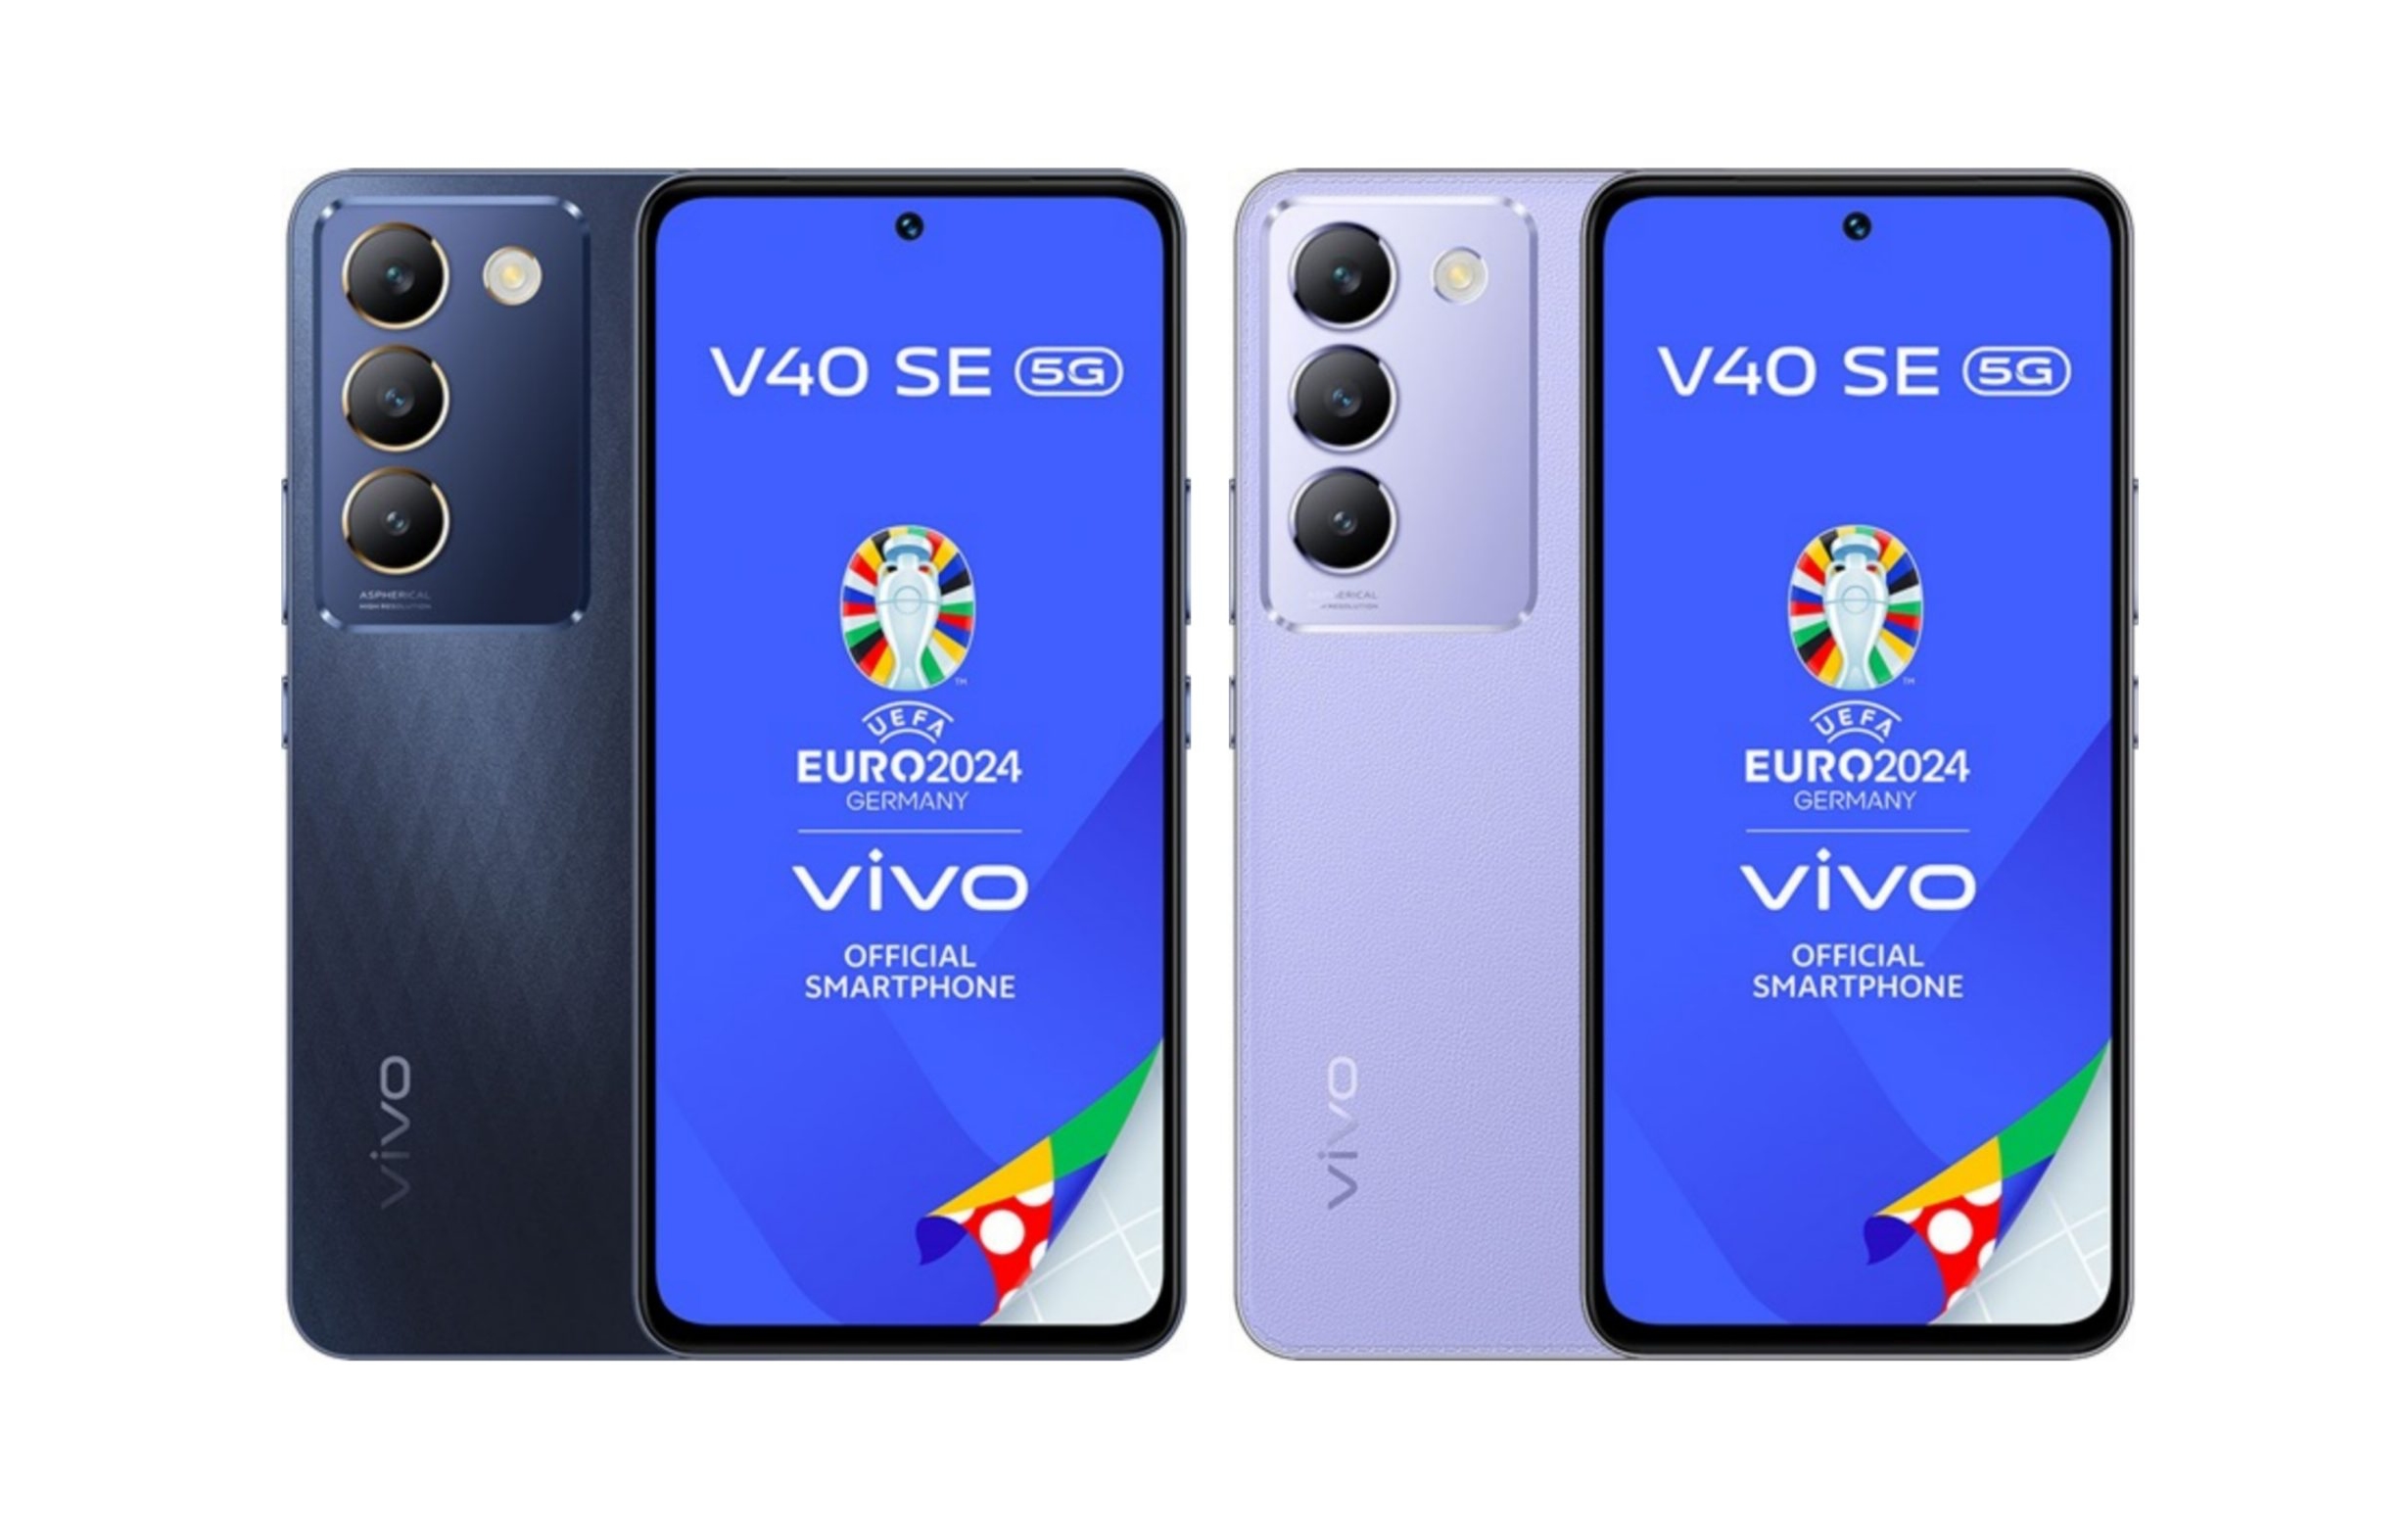 An insider has revealed the appearance, specs and European price of the vivo V40 SE smartphone